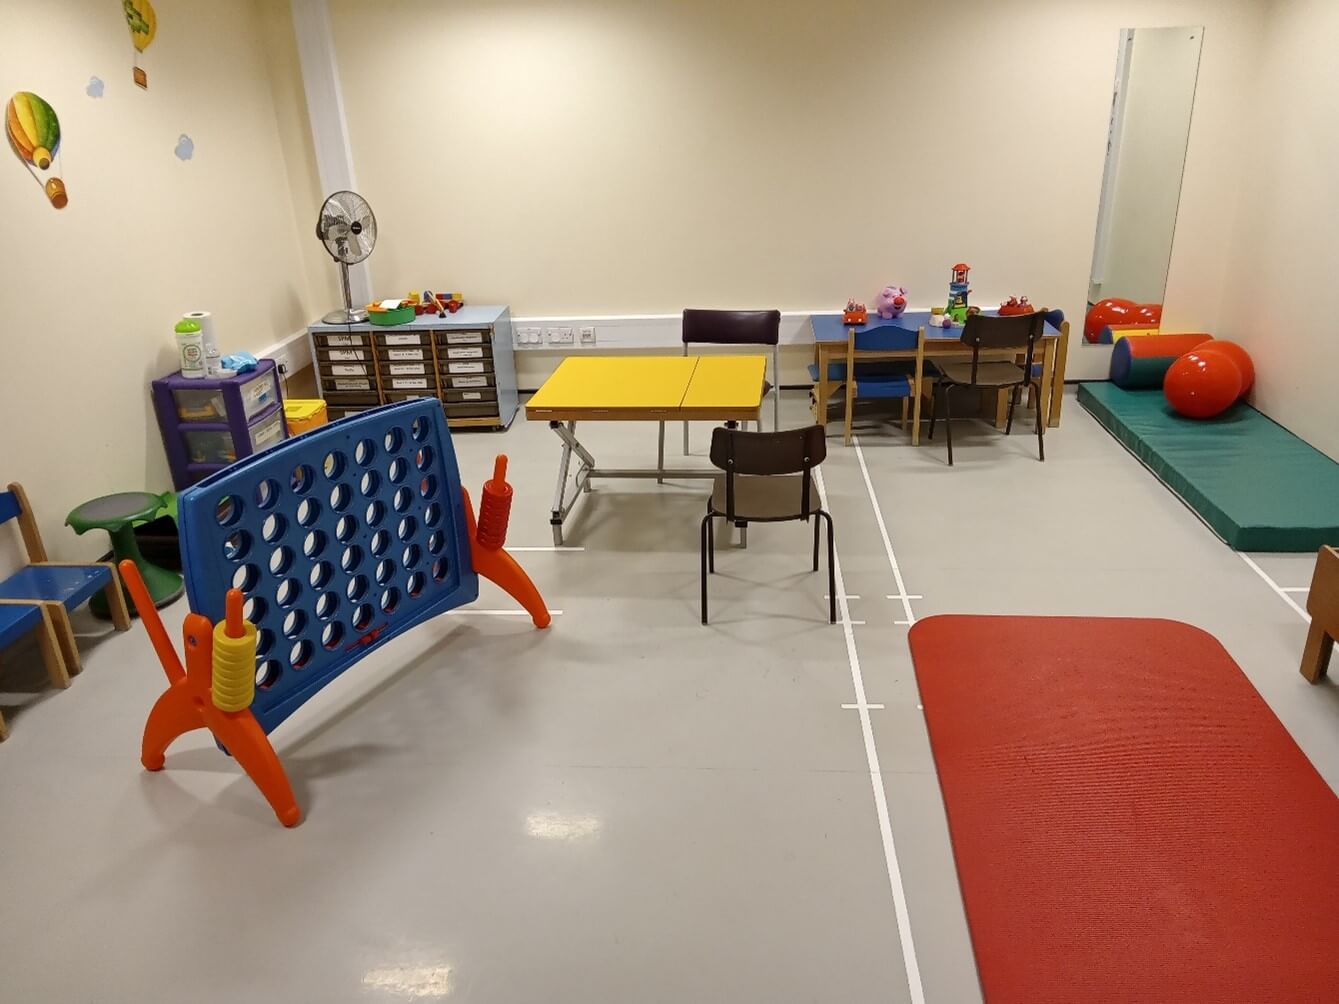 Our occupational therapy assessment room